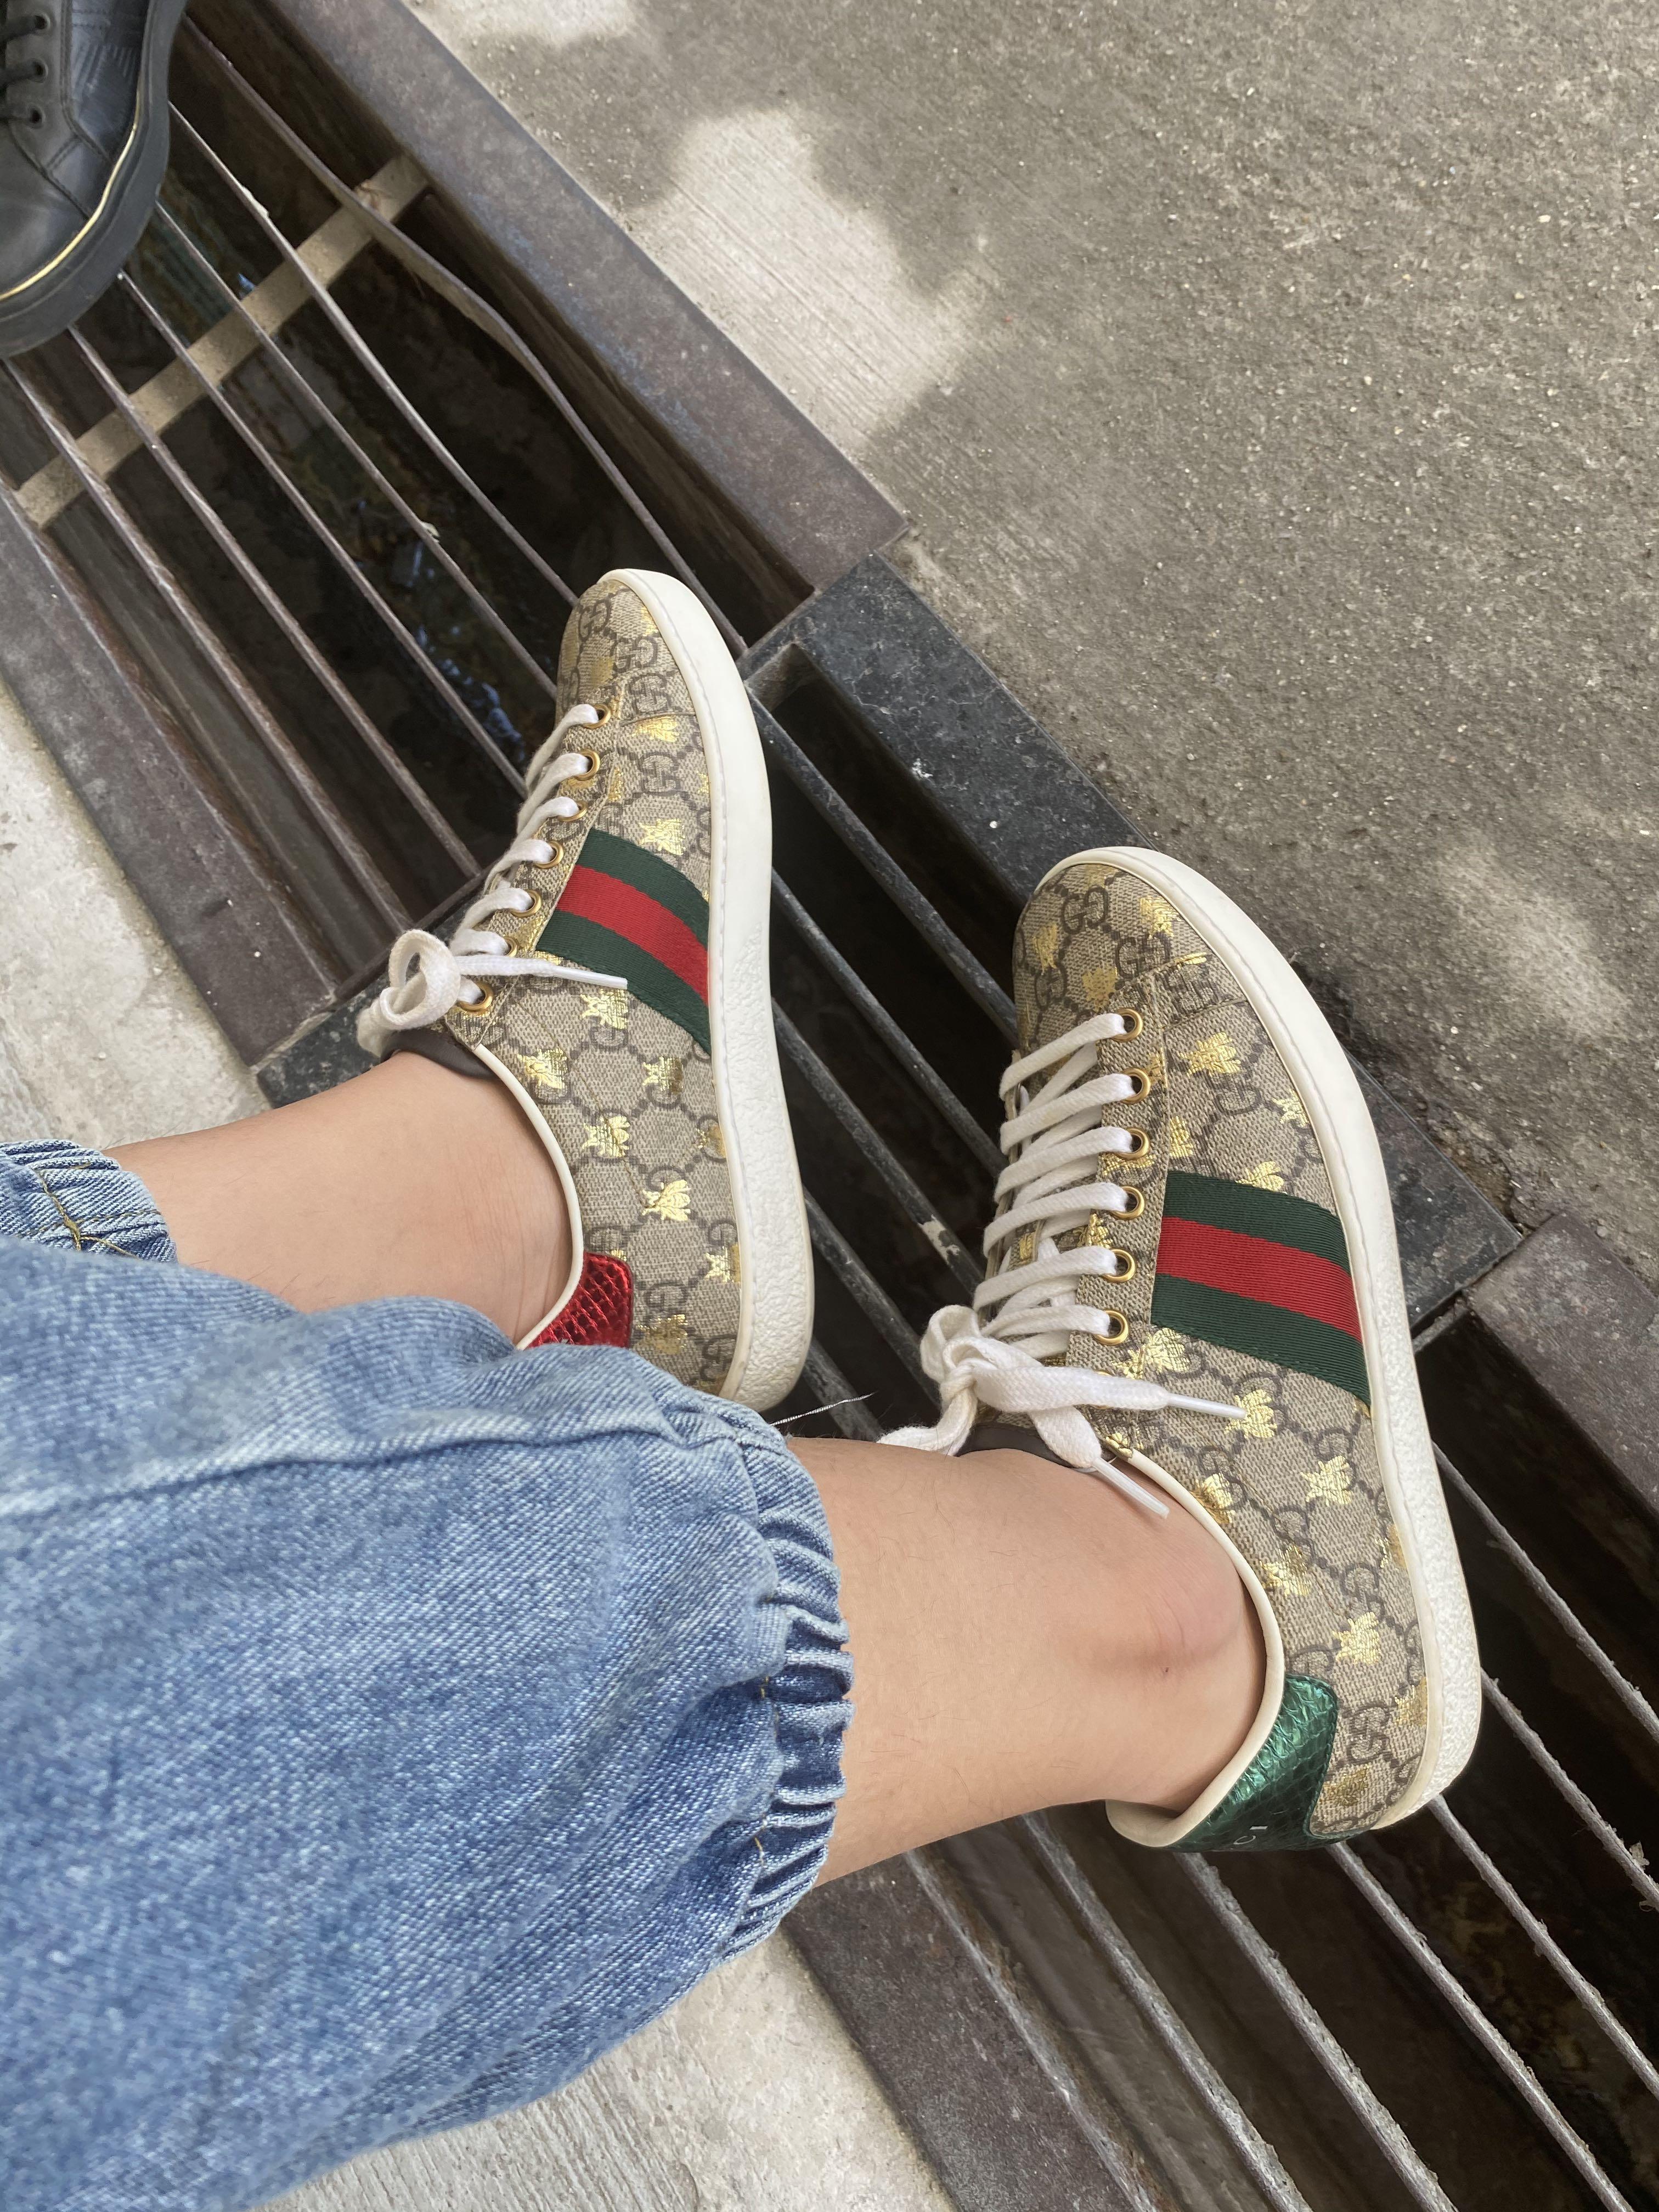 Gucci Ace Gg Supreme Bees Sneakers